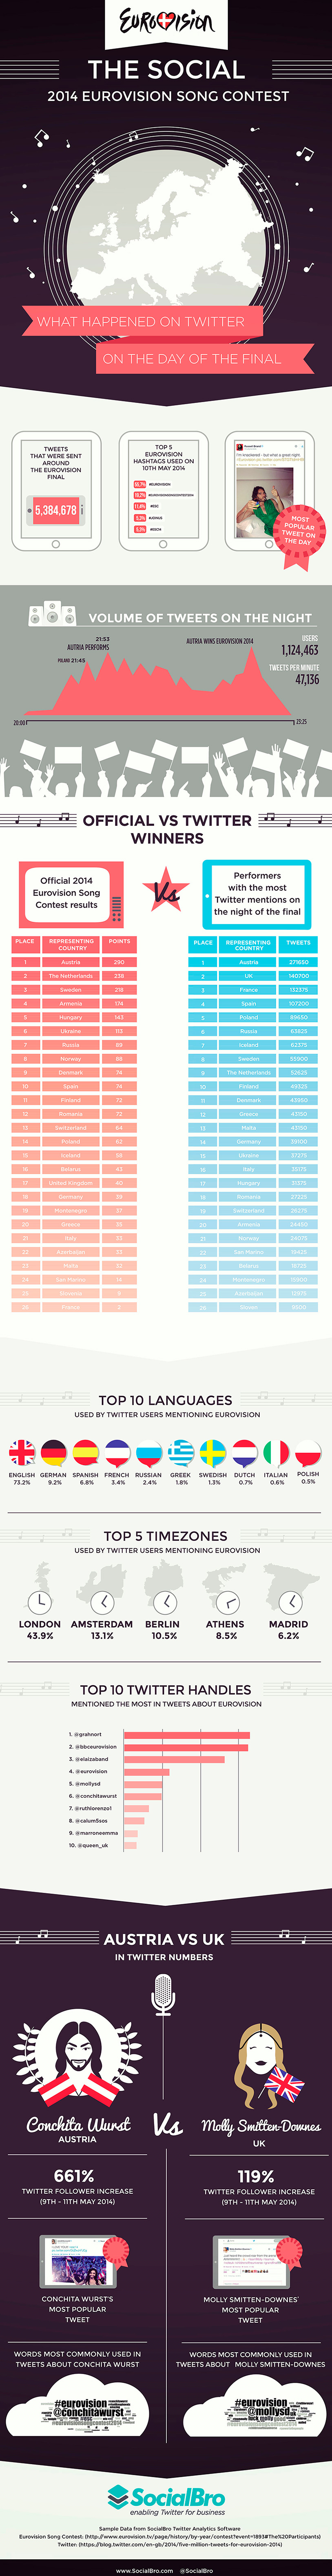 eurovision_infographic_Eng-socialbro-mid-res